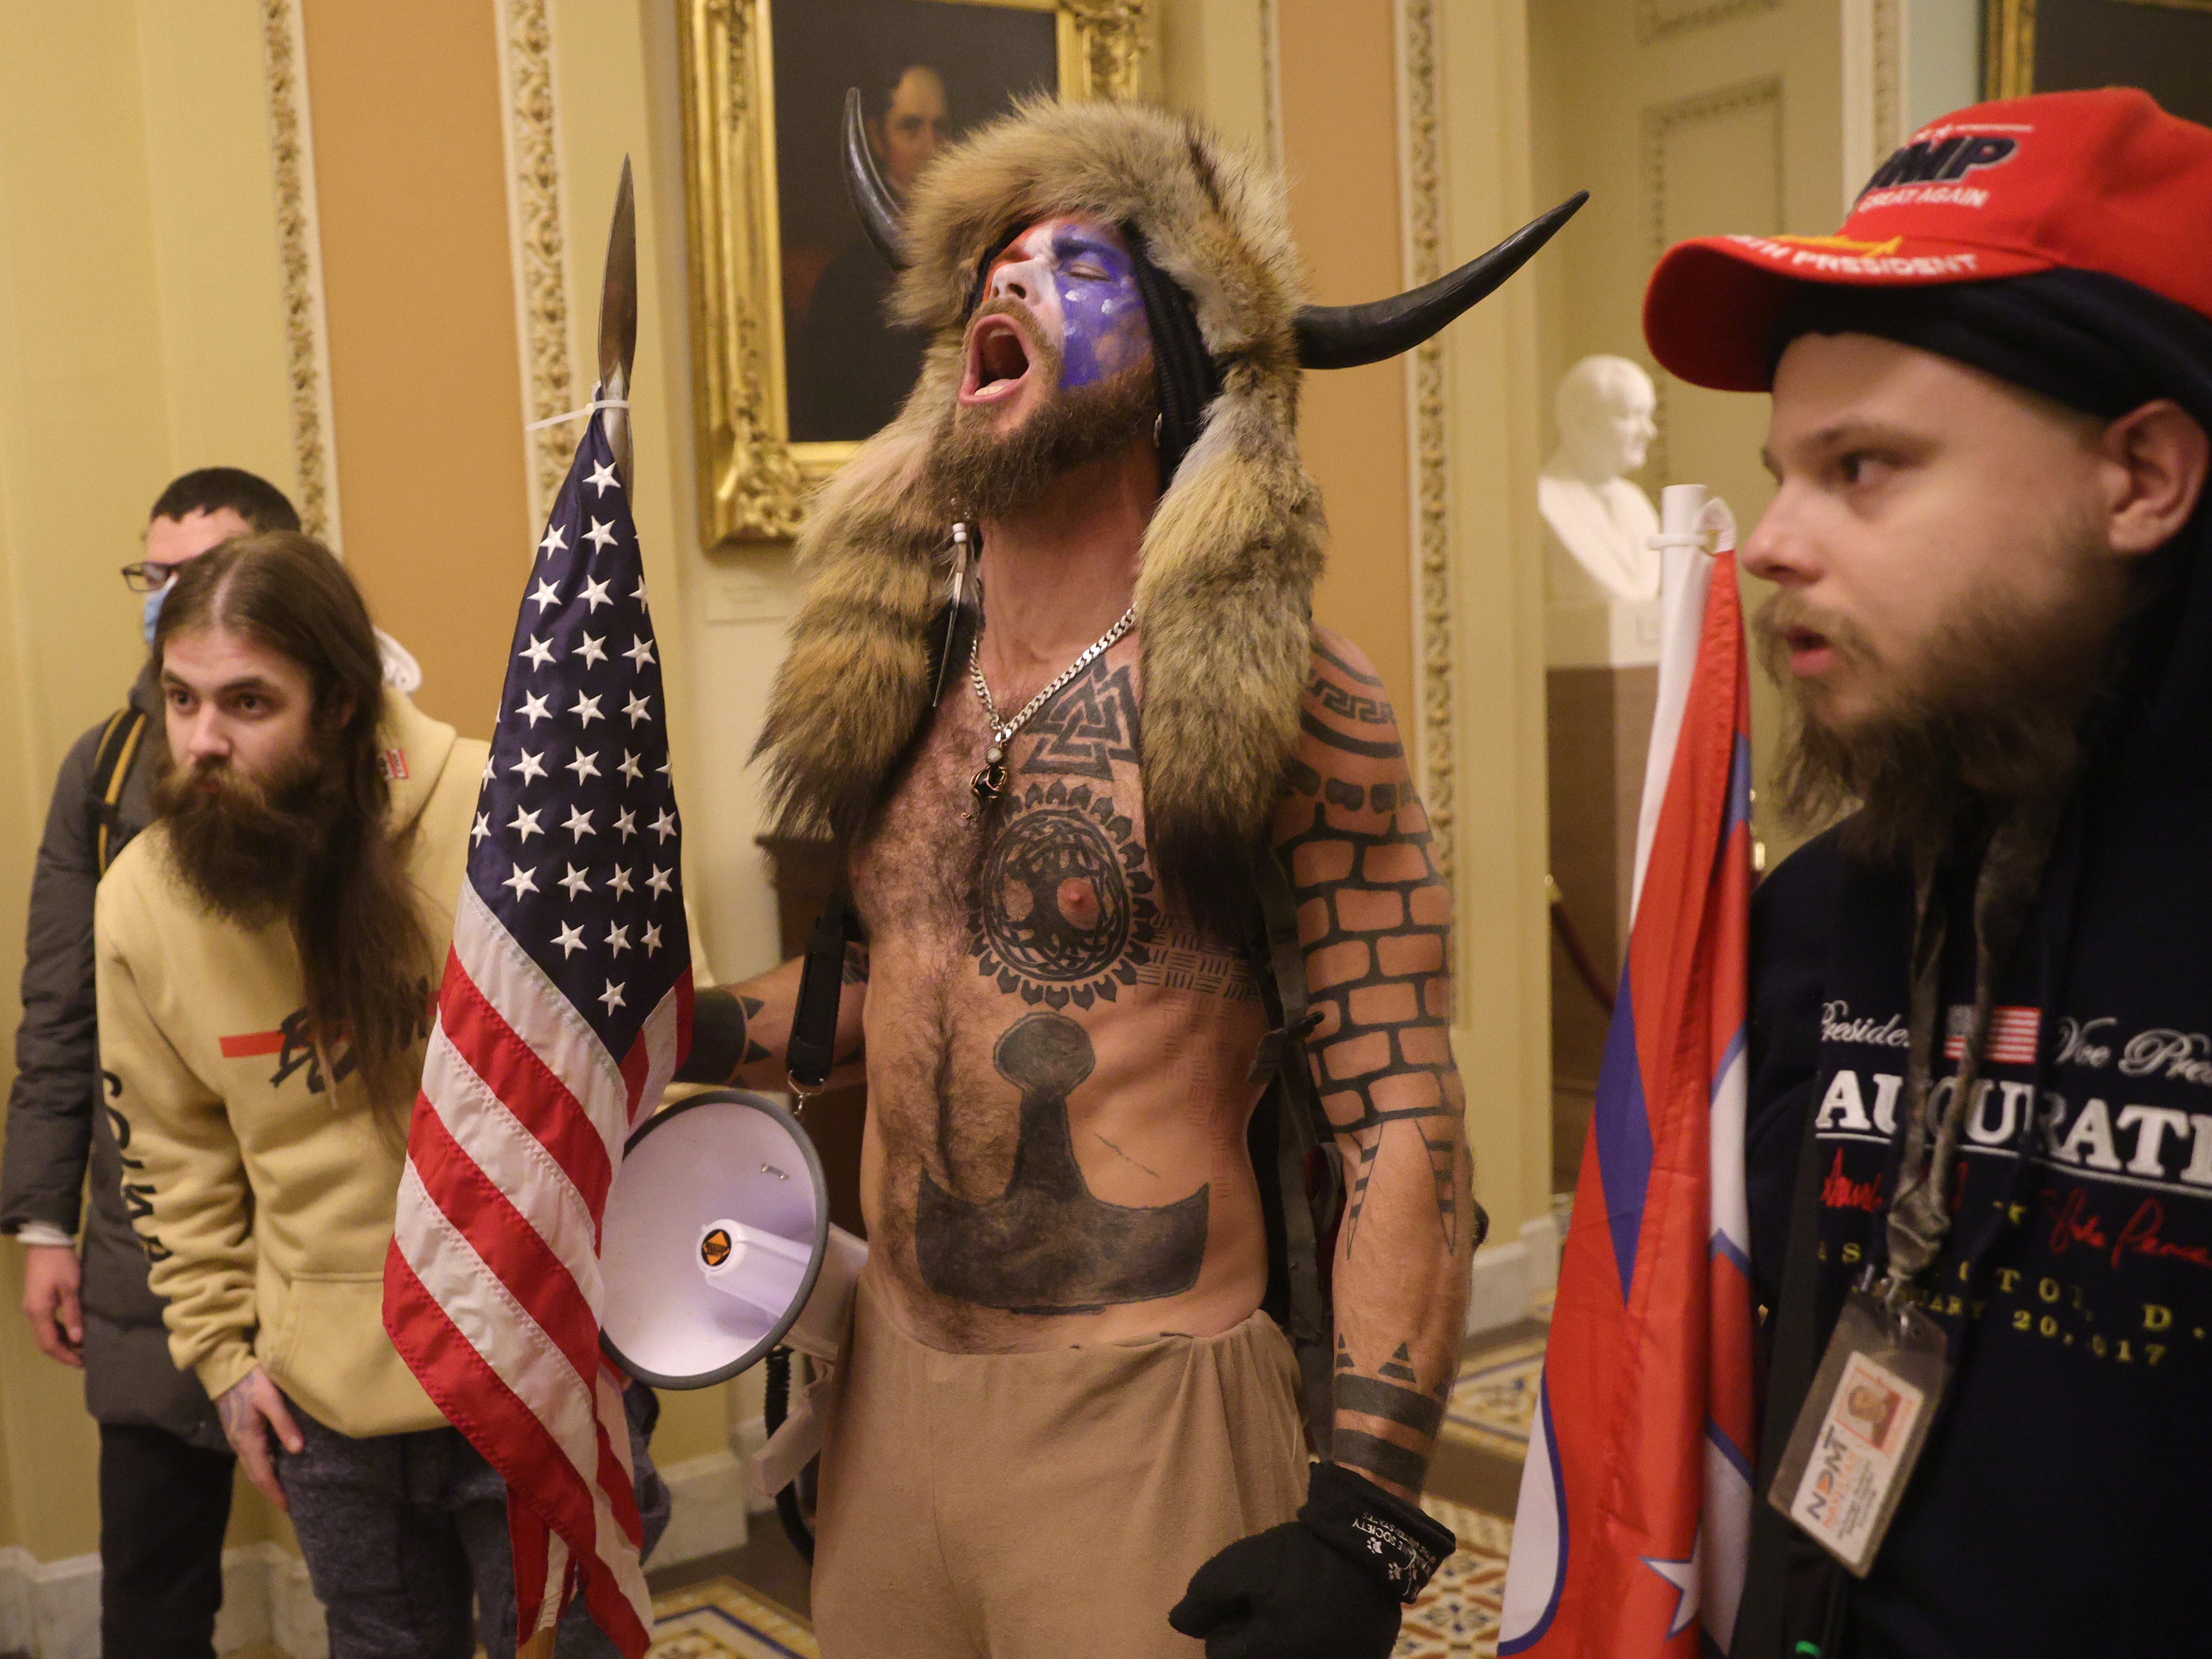 Jacob Chansley, seen here in his horns during the Capitol riot, now blames Donald Trump for his actions